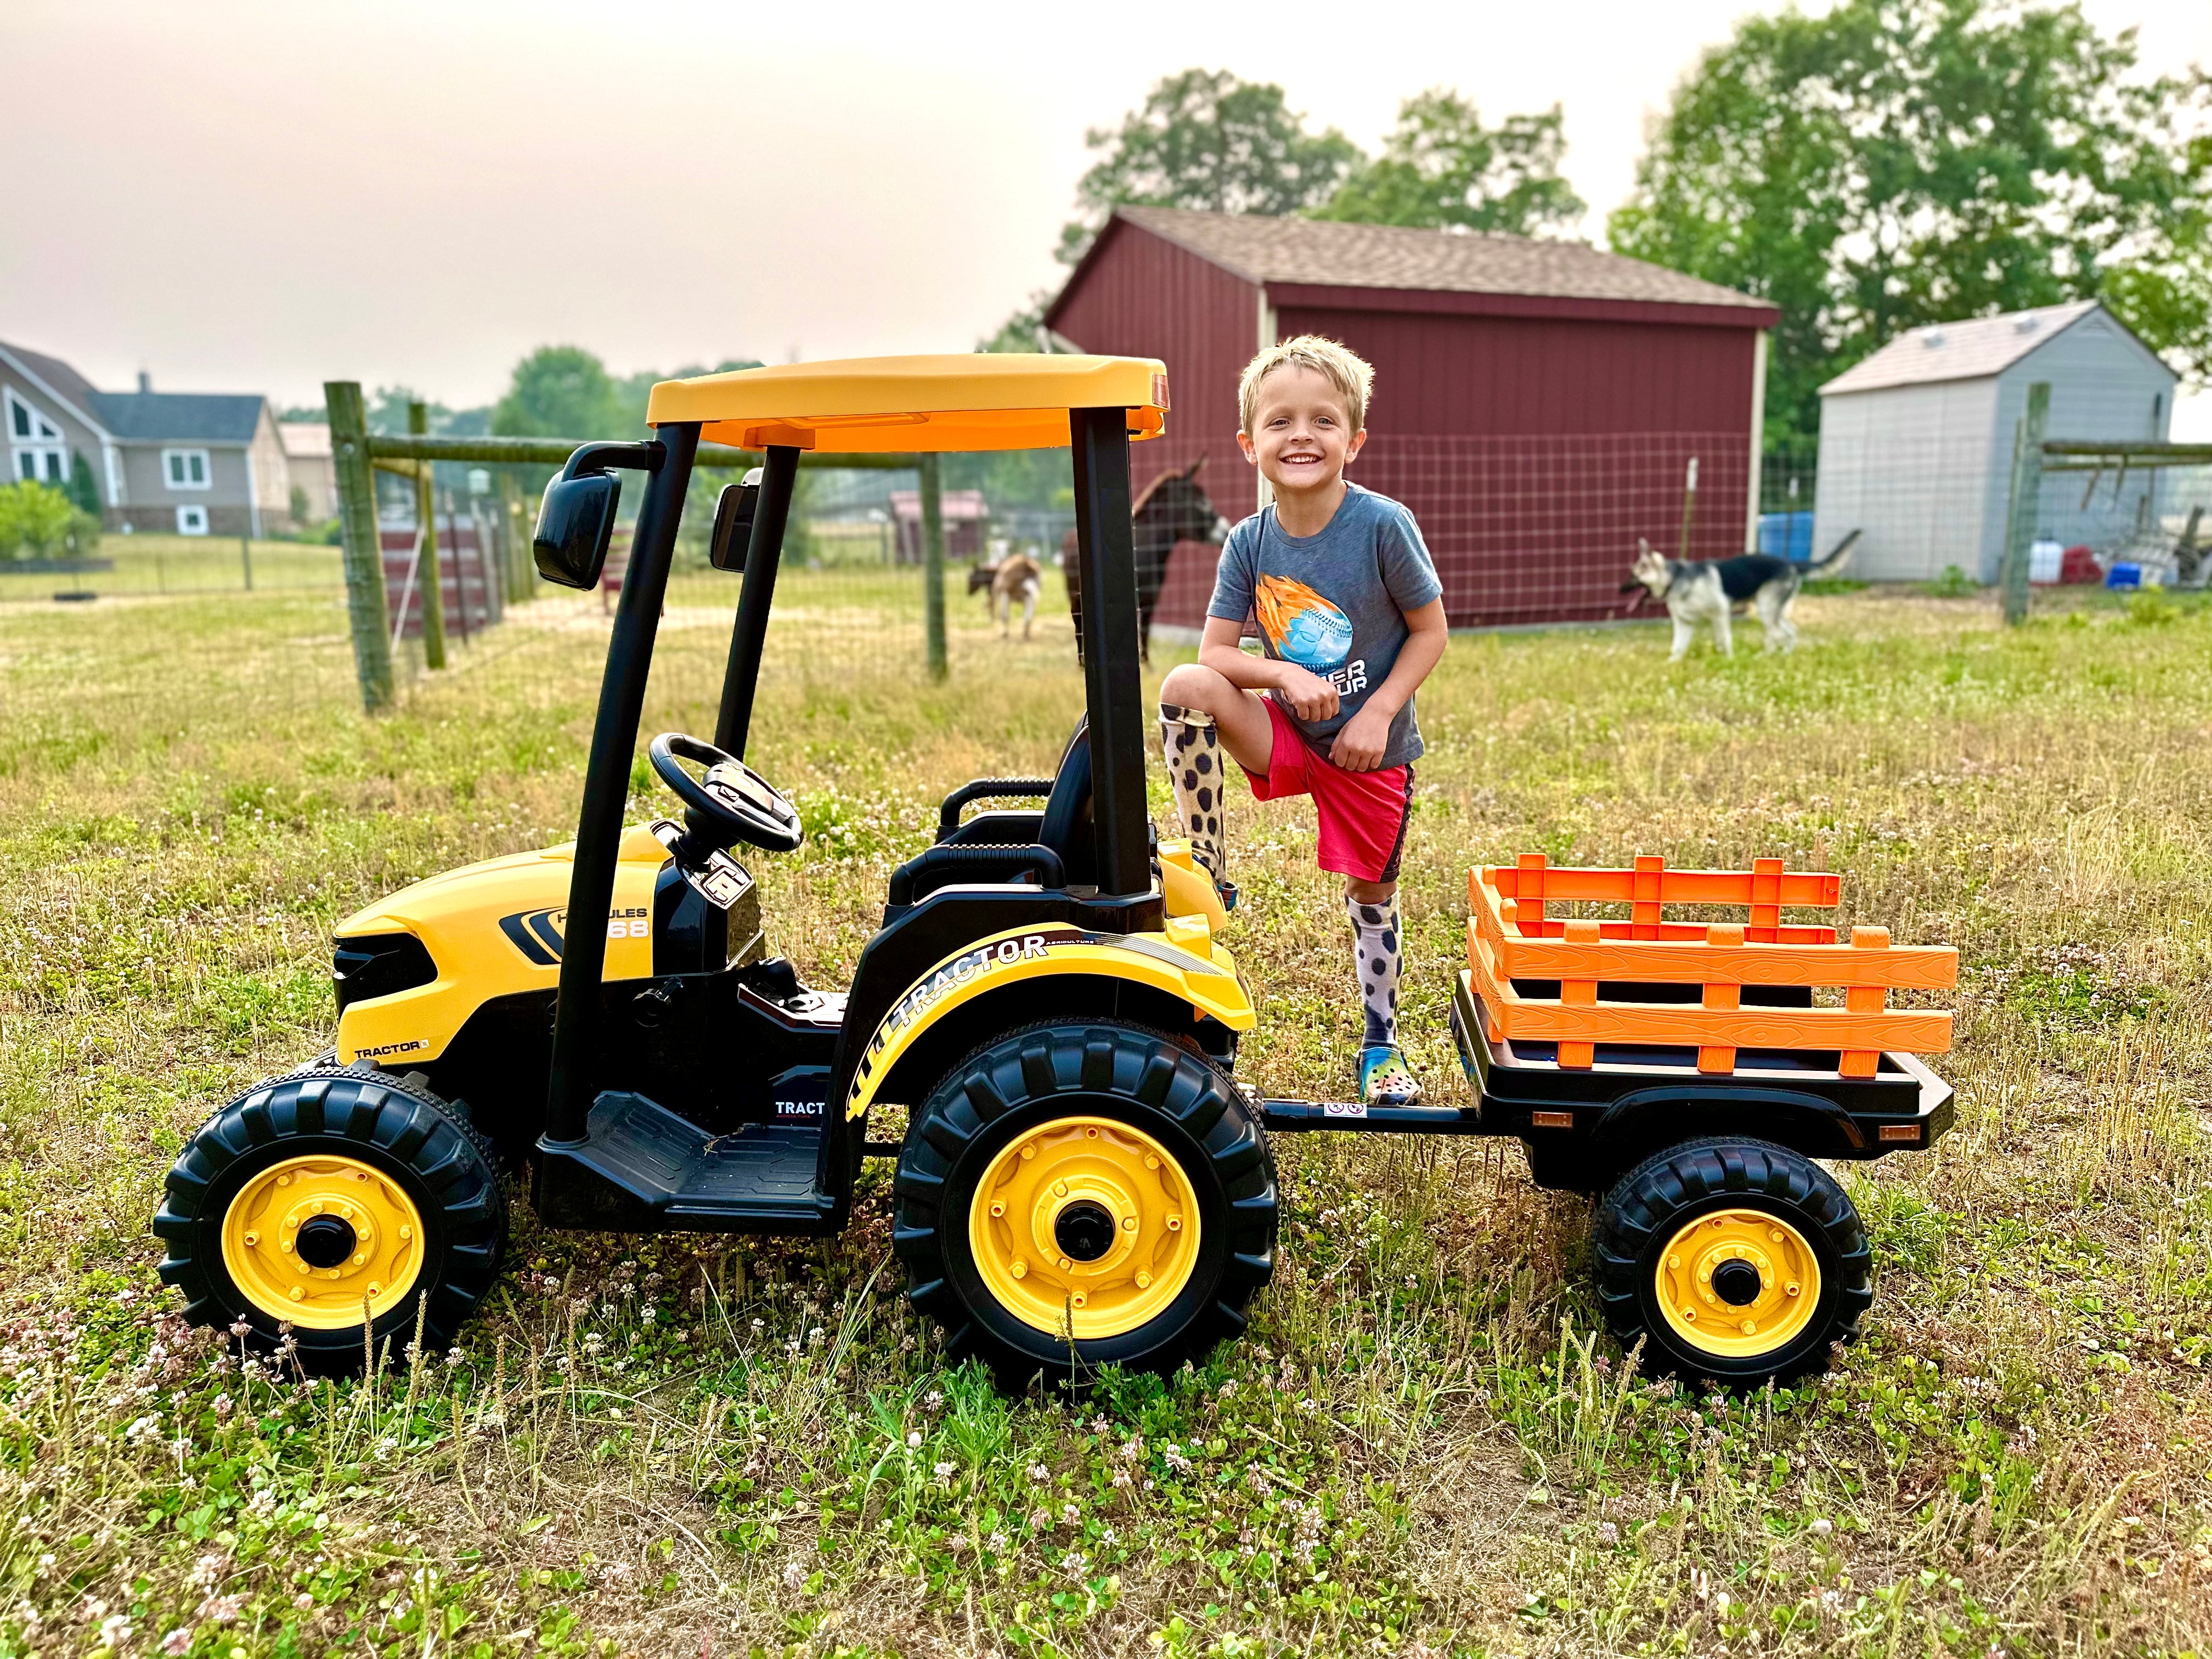 Kidsera 24V Kids Ride on Tractor with Trailer&Front Loader, Toddler 3-Gear-Shift Ground Loader Car with Dual Motor, Battery Powered Electric Vehicle Toys (Yellow Tractor with Trailer & Front Loader)